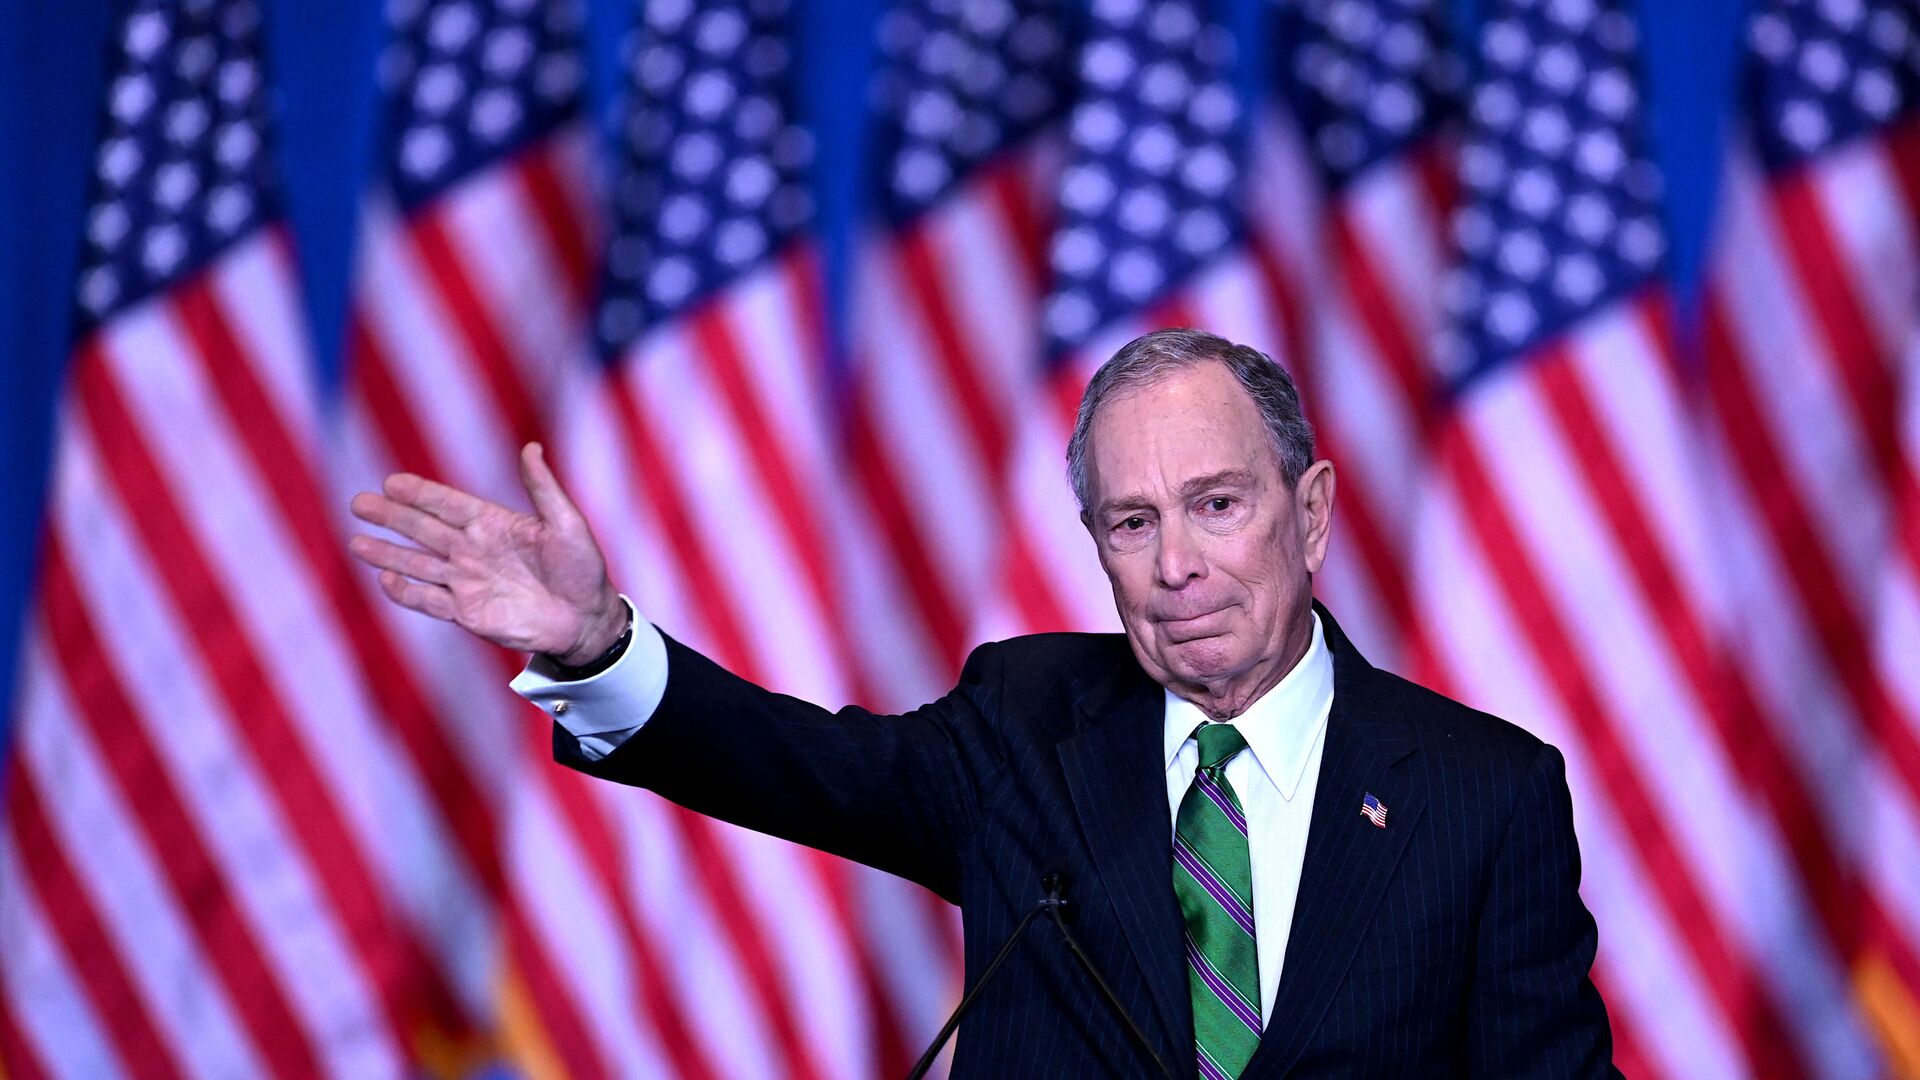 Former democratic presidential candidate and former New York City mayor Mike Bloomberg speaks to supporters and staff on March 4, 2020 in New York City. - Sputnik International, 1920, 10.06.2021